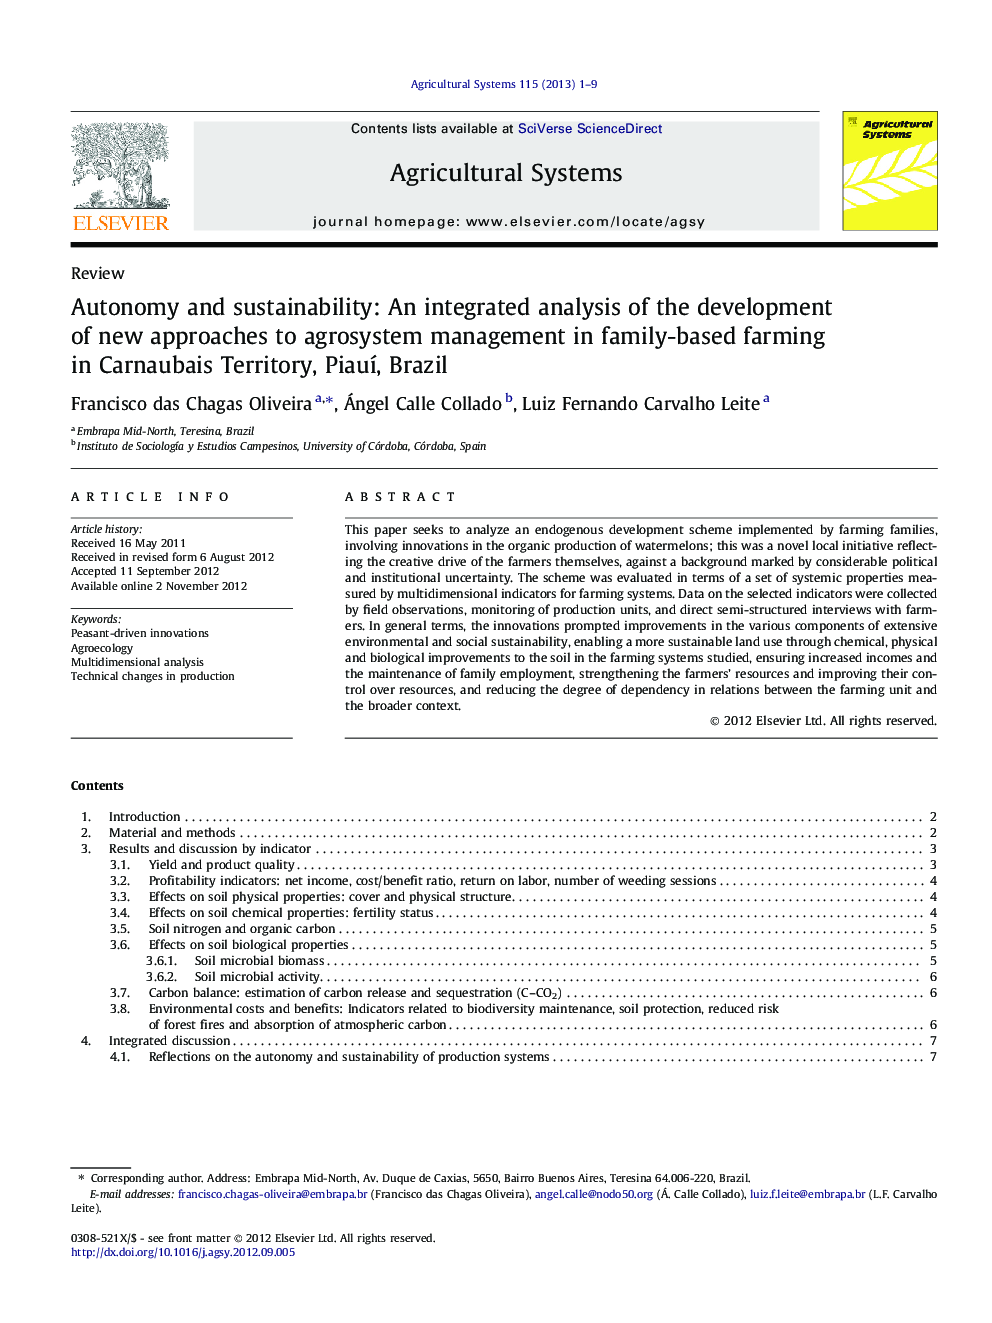 Autonomy and sustainability: An integrated analysis of the development of new approaches to agrosystem management in family-based farming in Carnaubais Territory, Piauí, Brazil